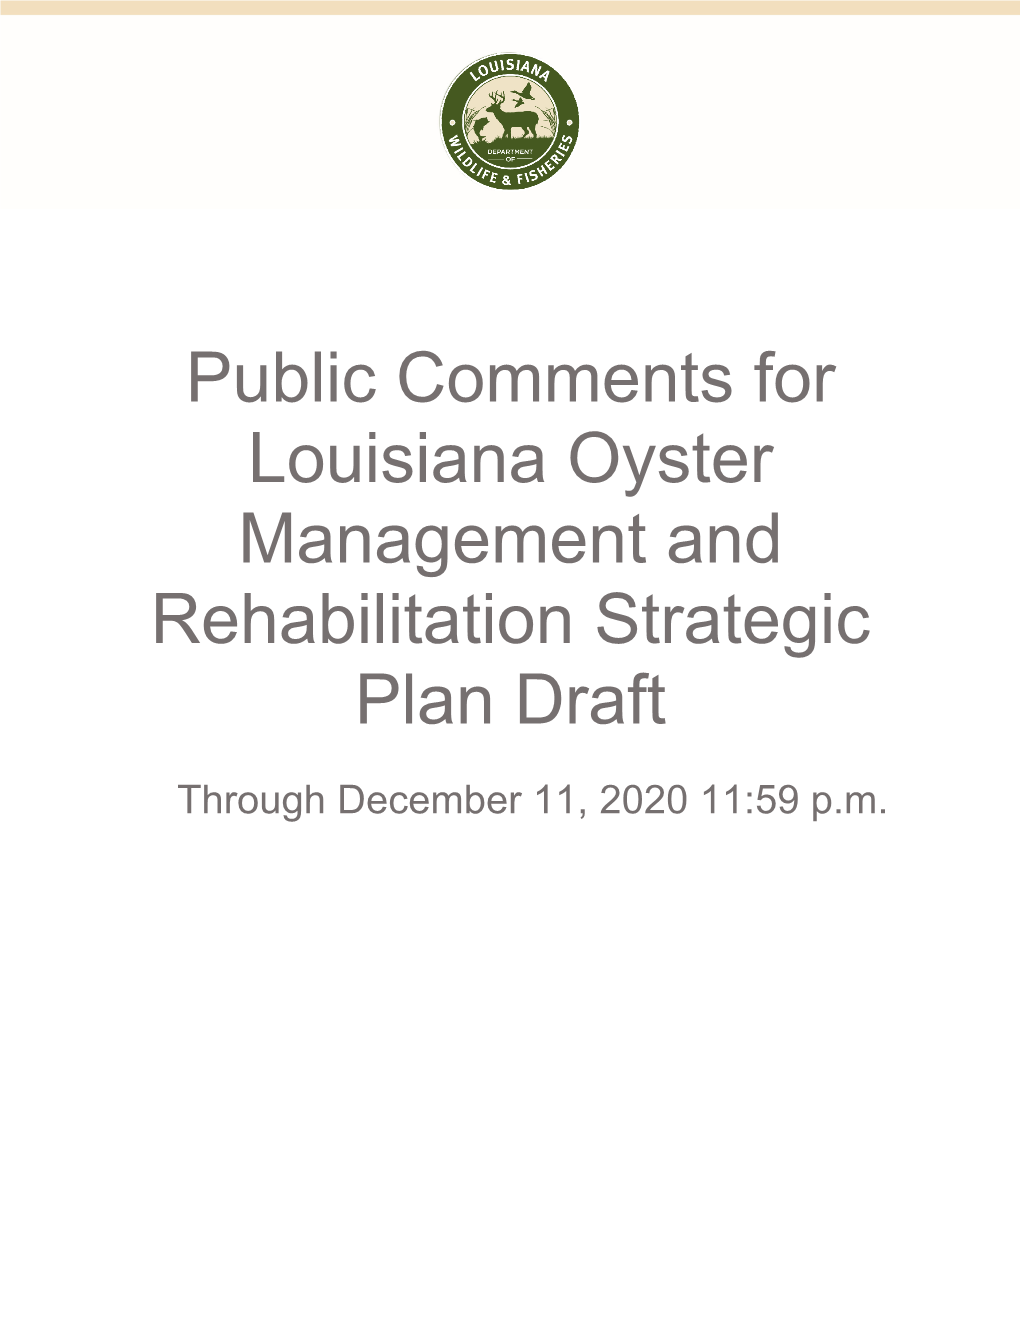 Public Comments for Louisiana Oyster Management and Rehabilitation Strategic Plan Draft